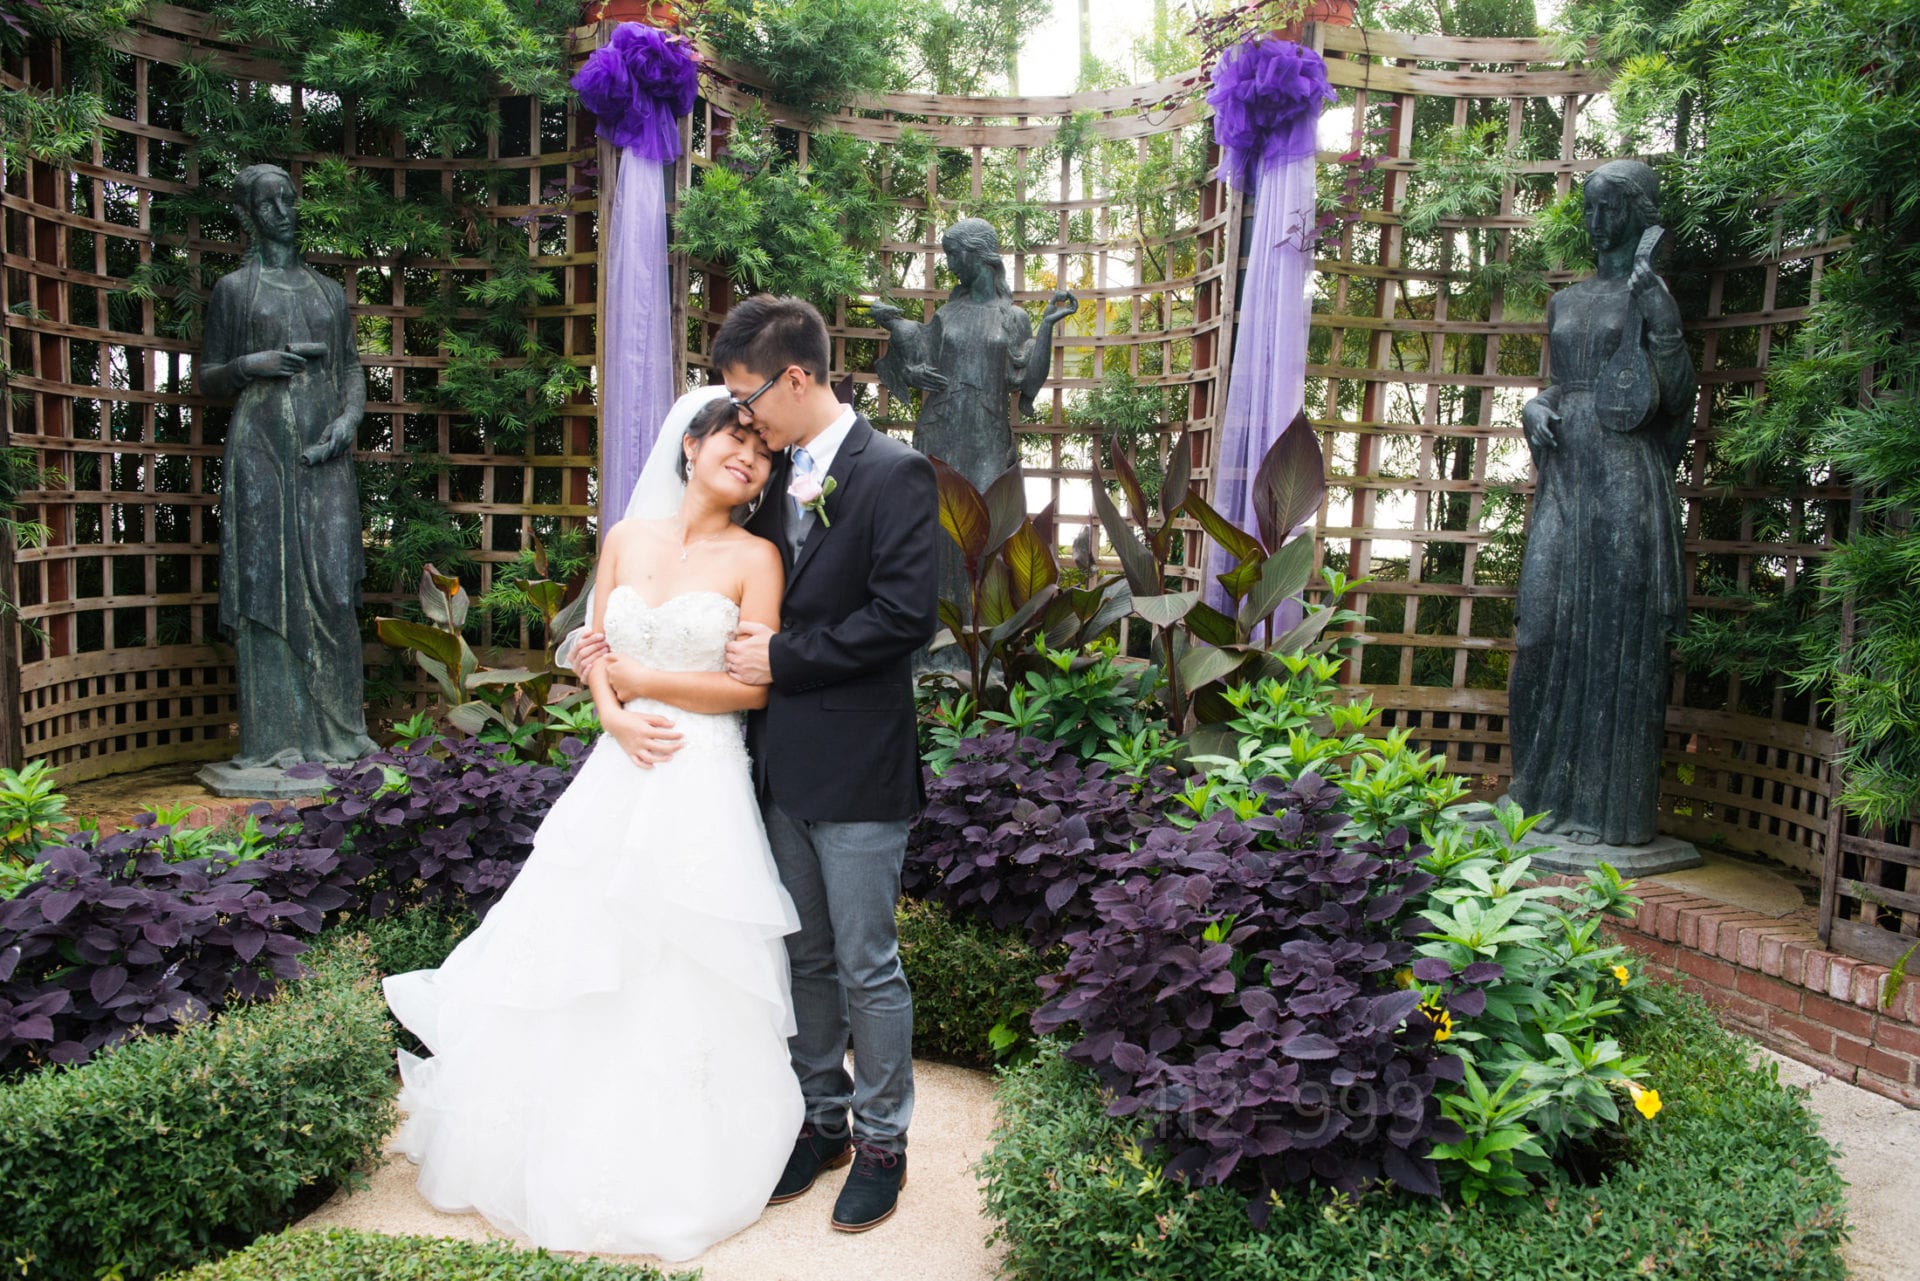 a bride in a white dress smiles with closed eyes while leaning into her groom. There are statues of women in the background with purple bunting hanging off of a trellis.